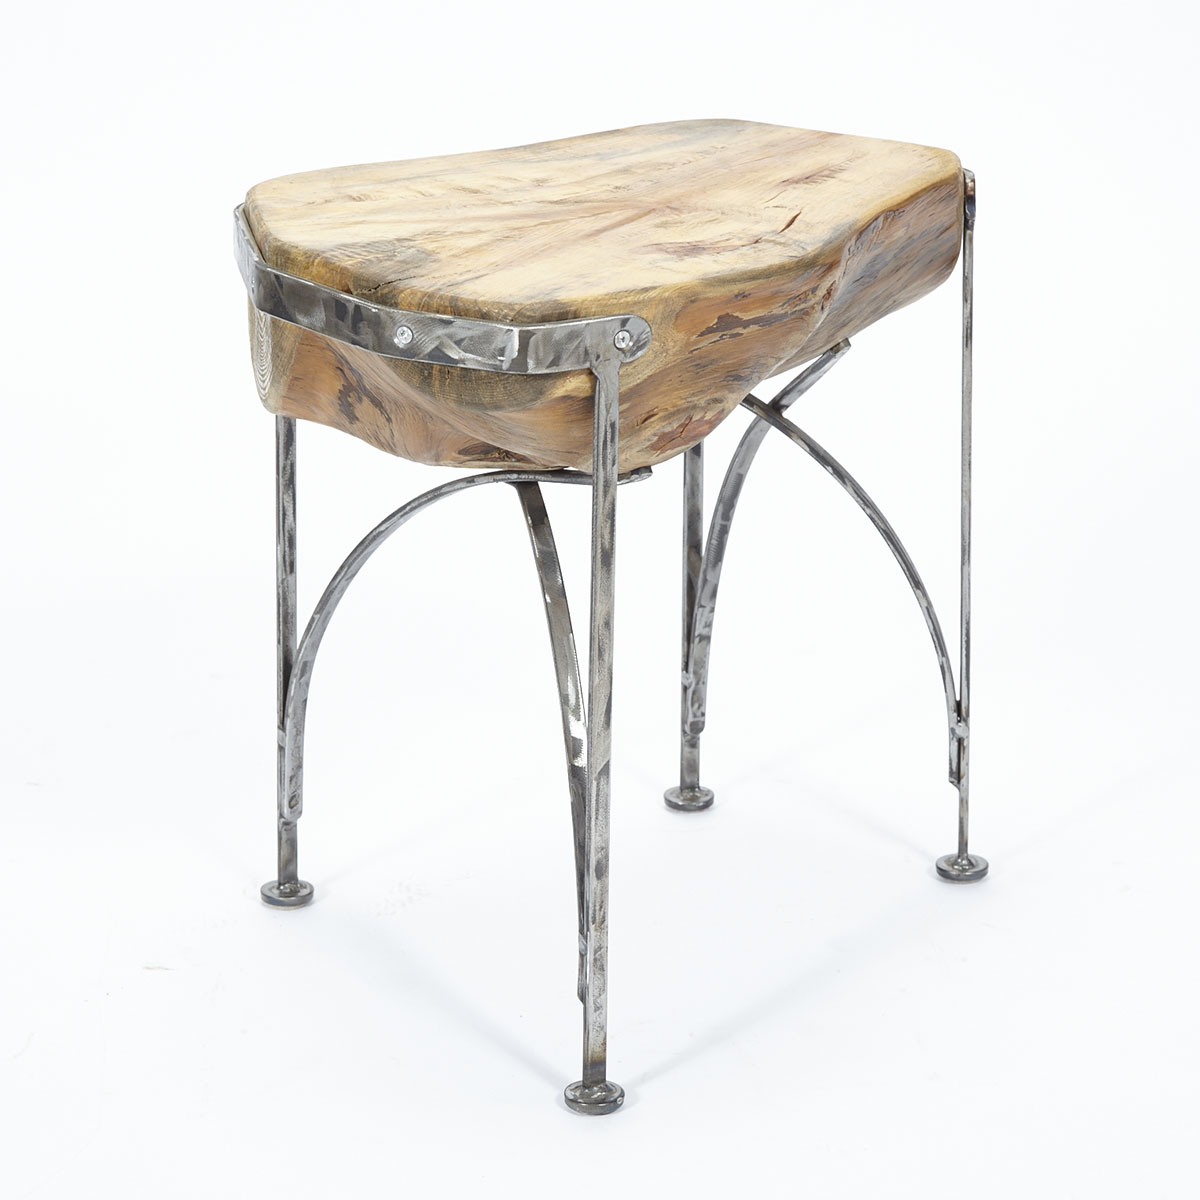 Contemporary Cedar Free Edge Log Table/ Stool on Wrought Iron Stand